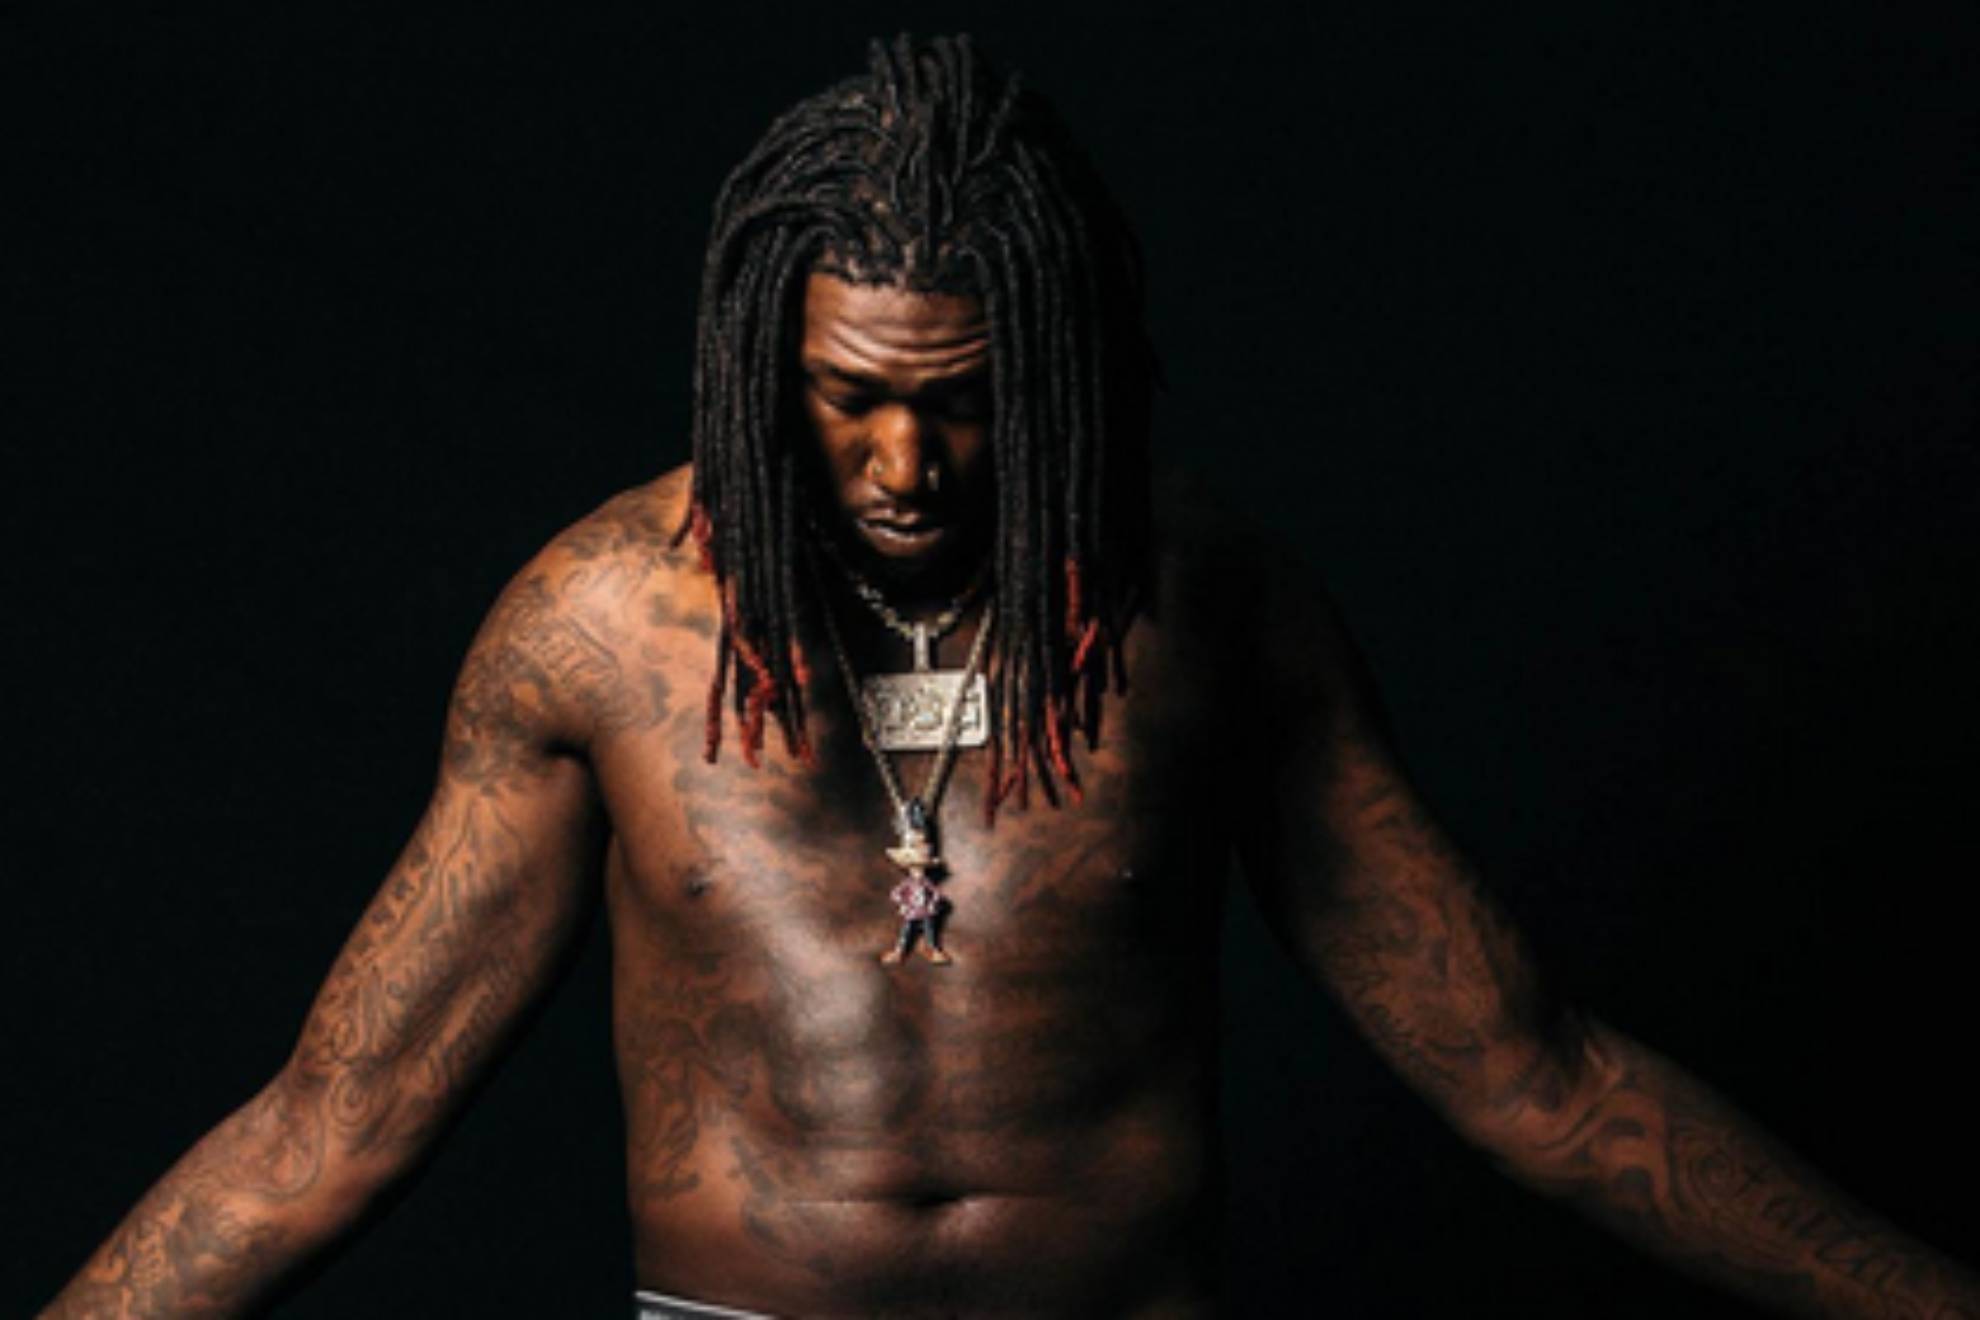 From avoiding jail for drug trafficking to pursuing NBA glory: Montrezl Harrell's dramatic fate U-turn